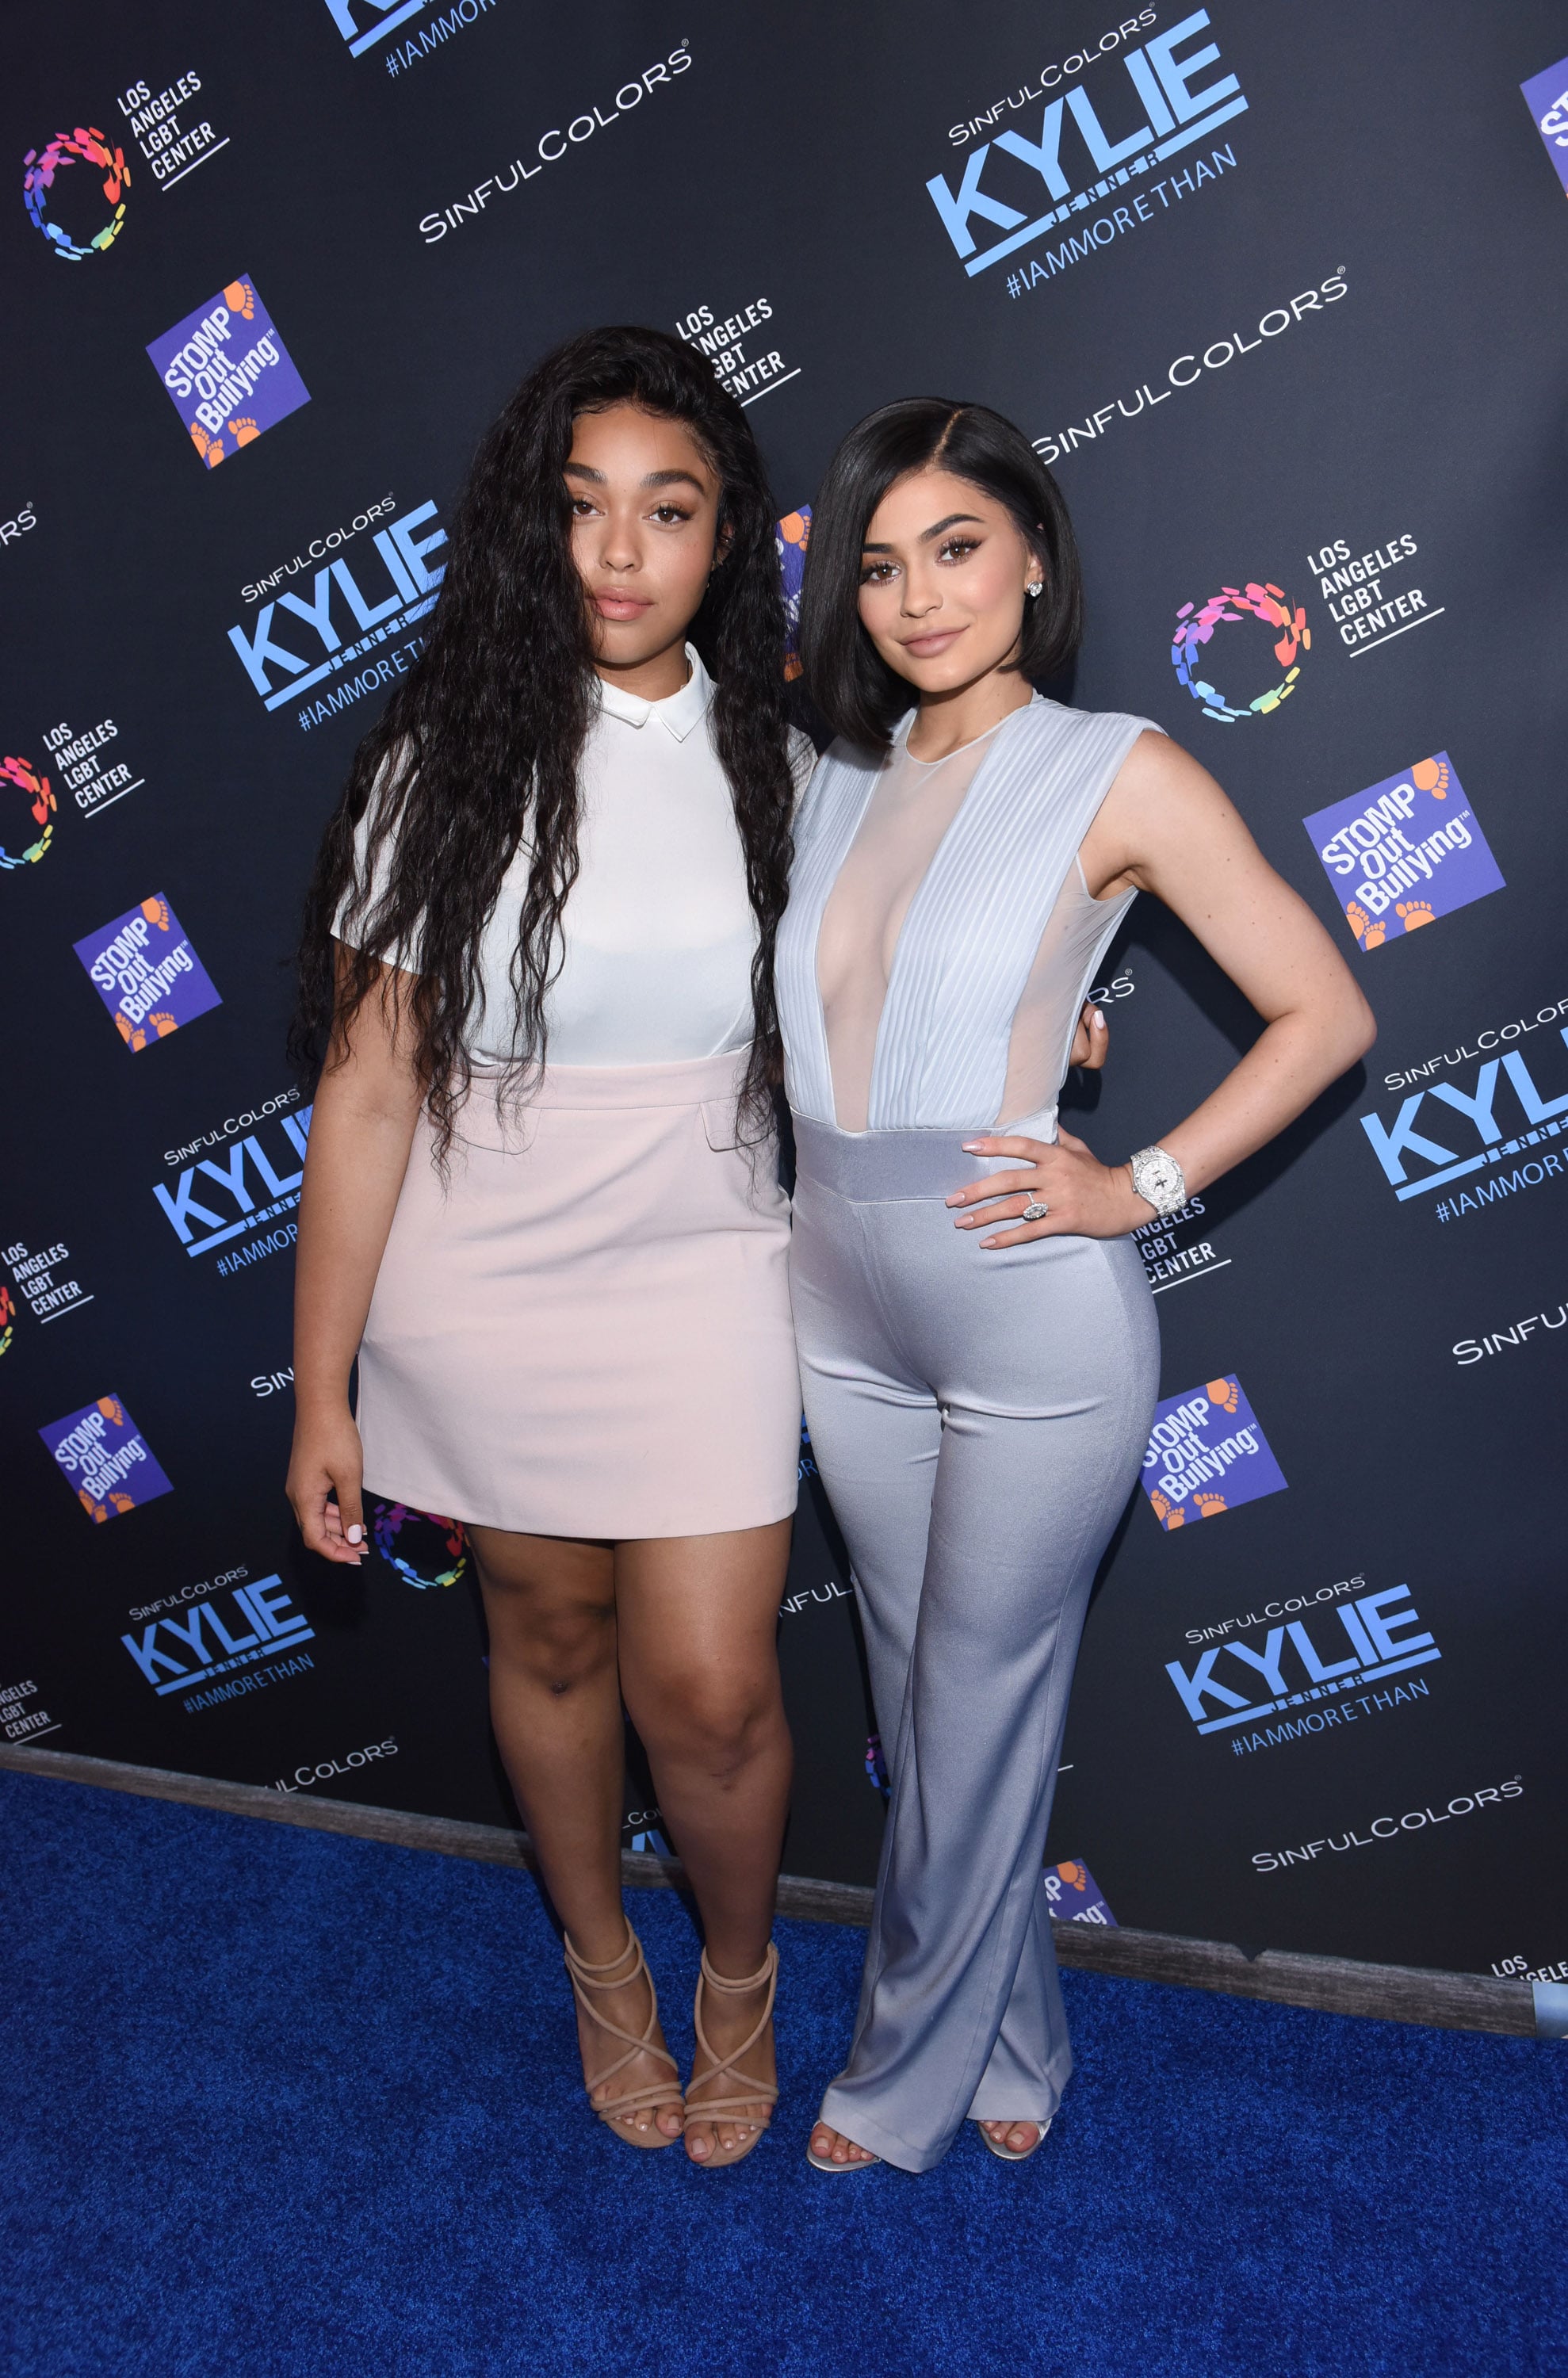 The Complete History Of Kylie Jenner & Jordyn Woods' Friendship - Capital  XTRA